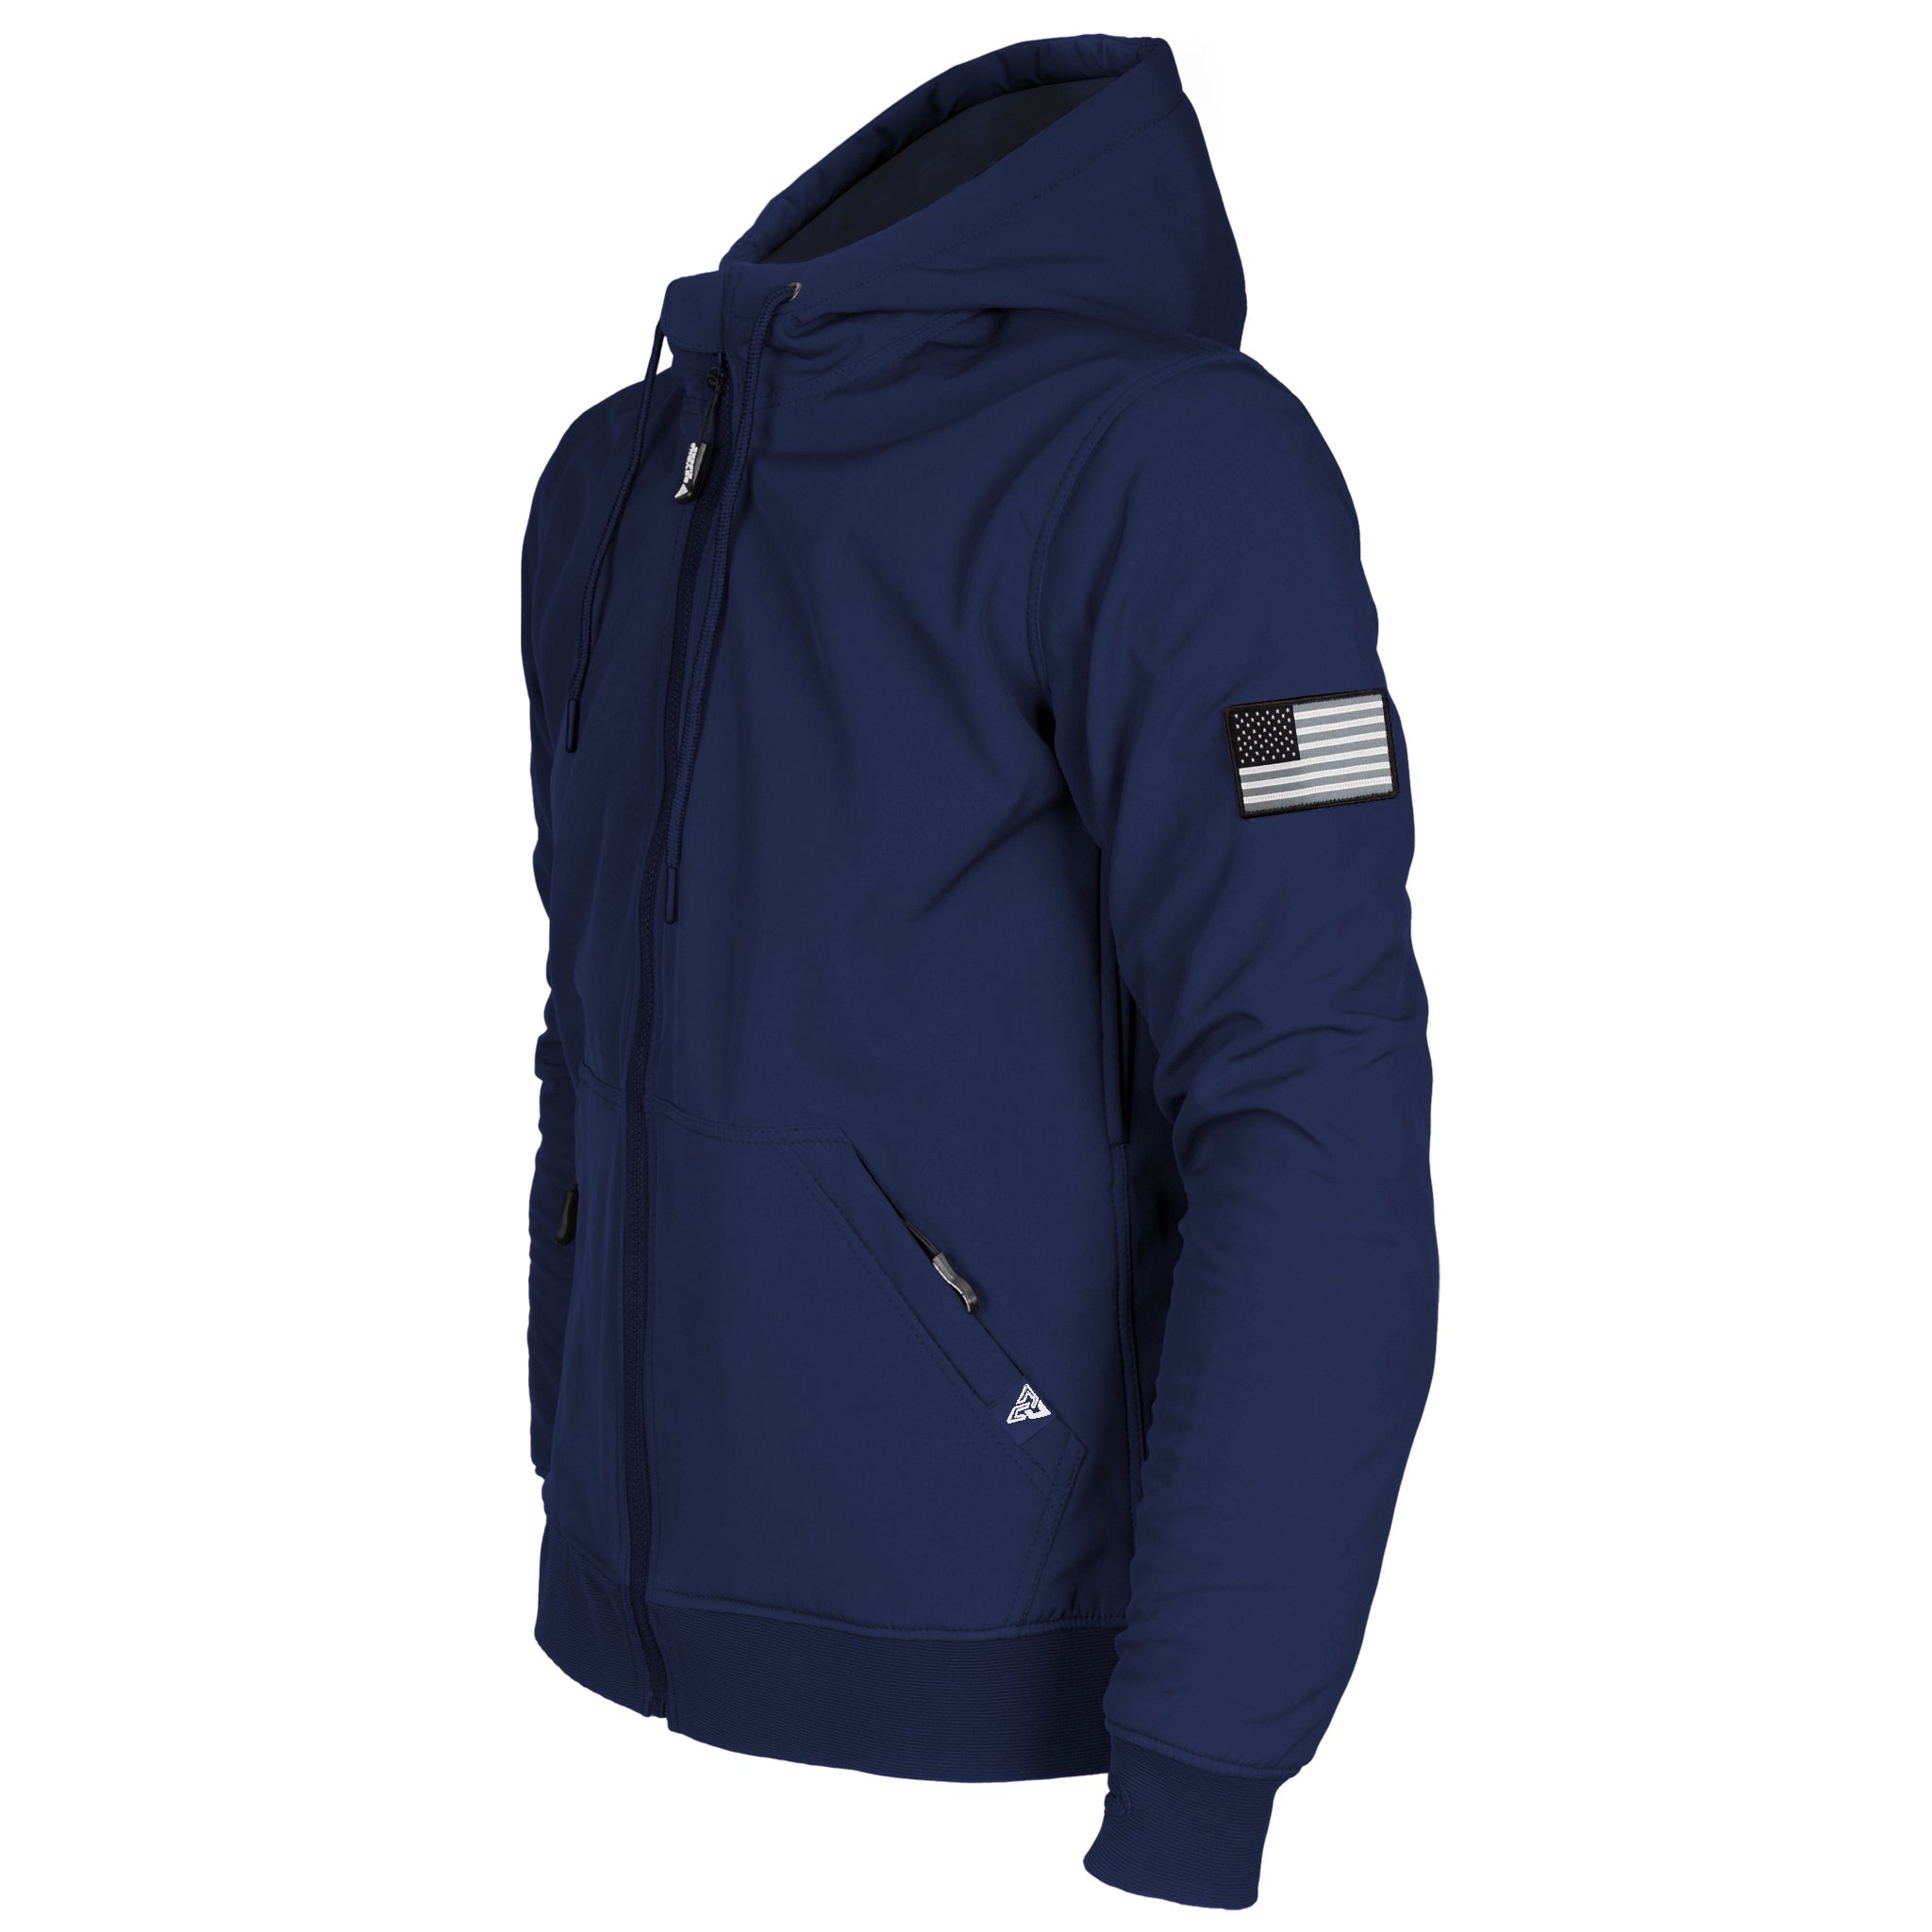 Protective SoftShell Unisex Hoodie - Navy Blue Matte with Pads